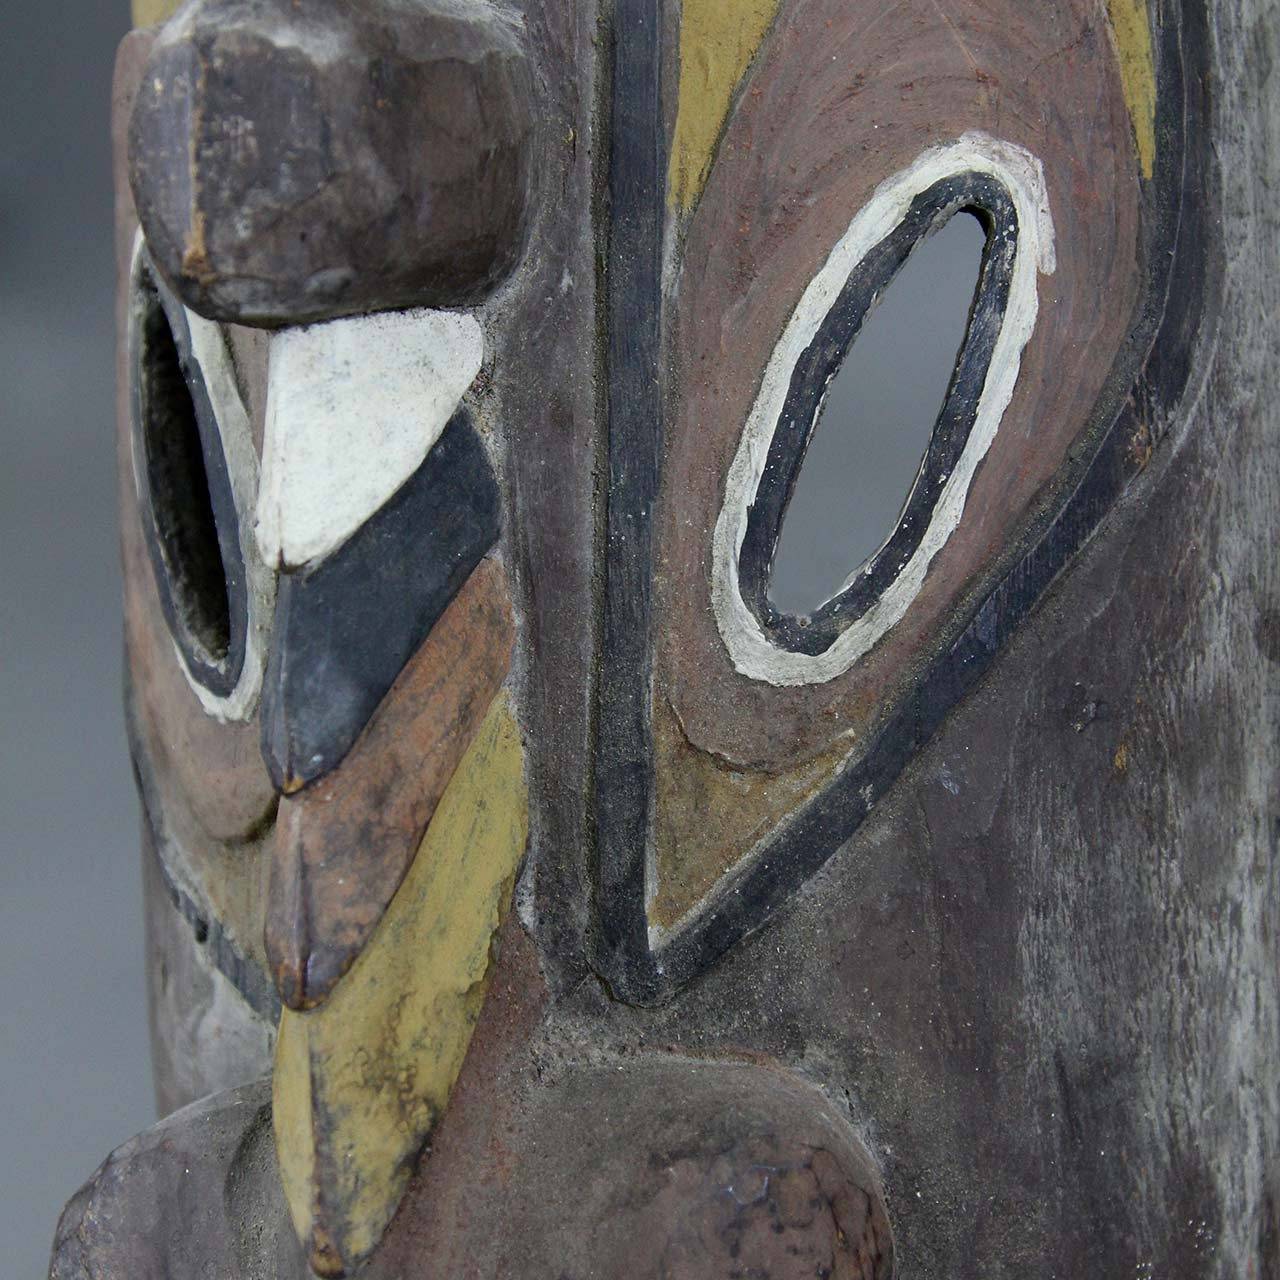 Ancestral spirit mask, made of wood colored with natural pigments. Carved and painted mask with elongated nose, further decorated with an antelope head and a second mask/man with arms stretched towards eyes of antelope, decorated with cowrie shell